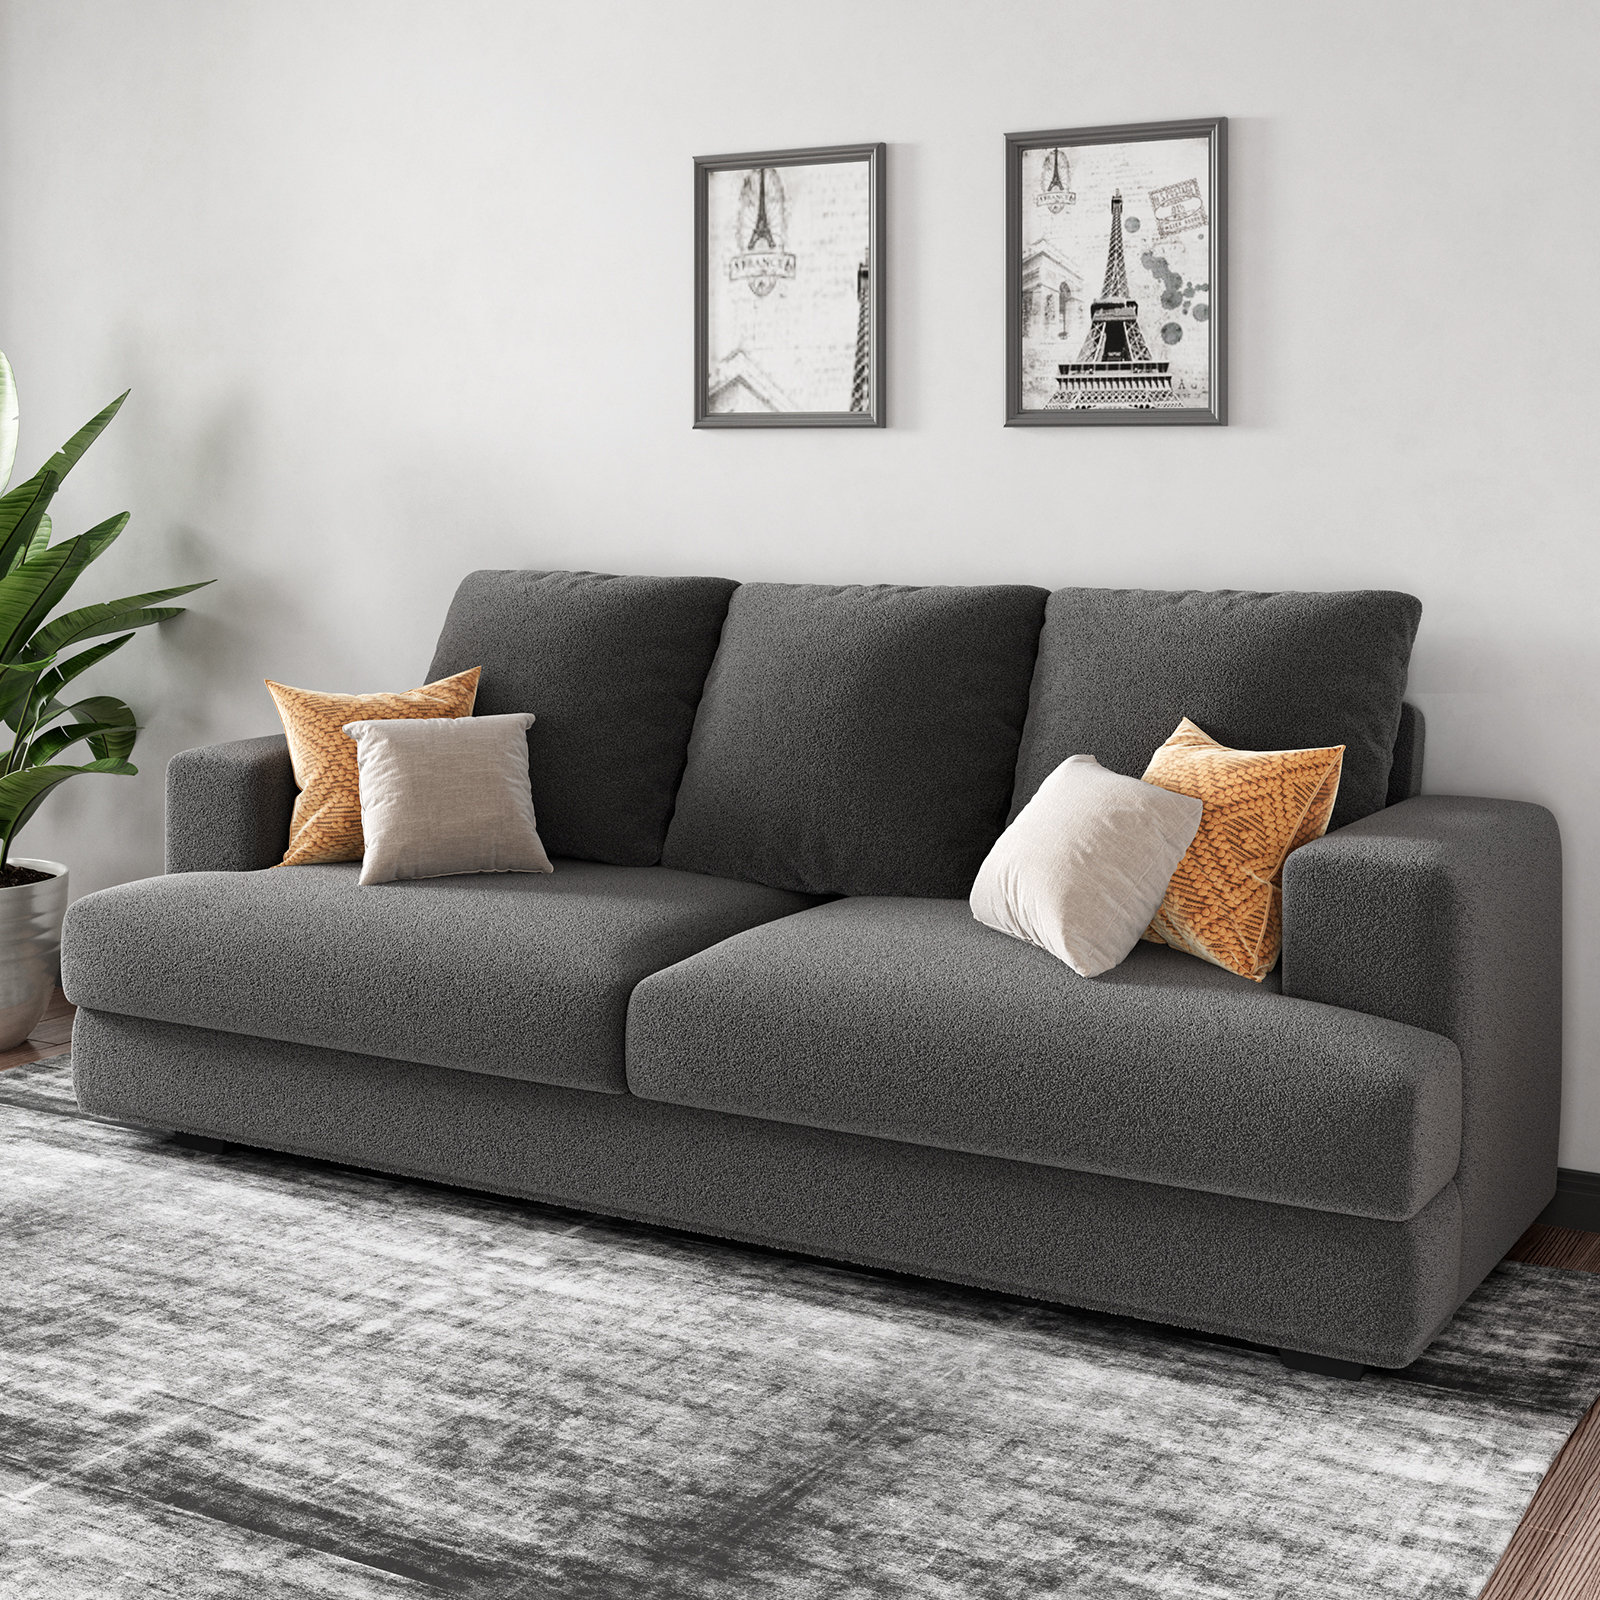  PaPaJet Sofa, Deep Seat Sofa Cushion-Contemporary Chenille Sofa  Couch, 3 Seater Sofa for Living Room-Oversized Sofa, Grey : Home & Kitchen